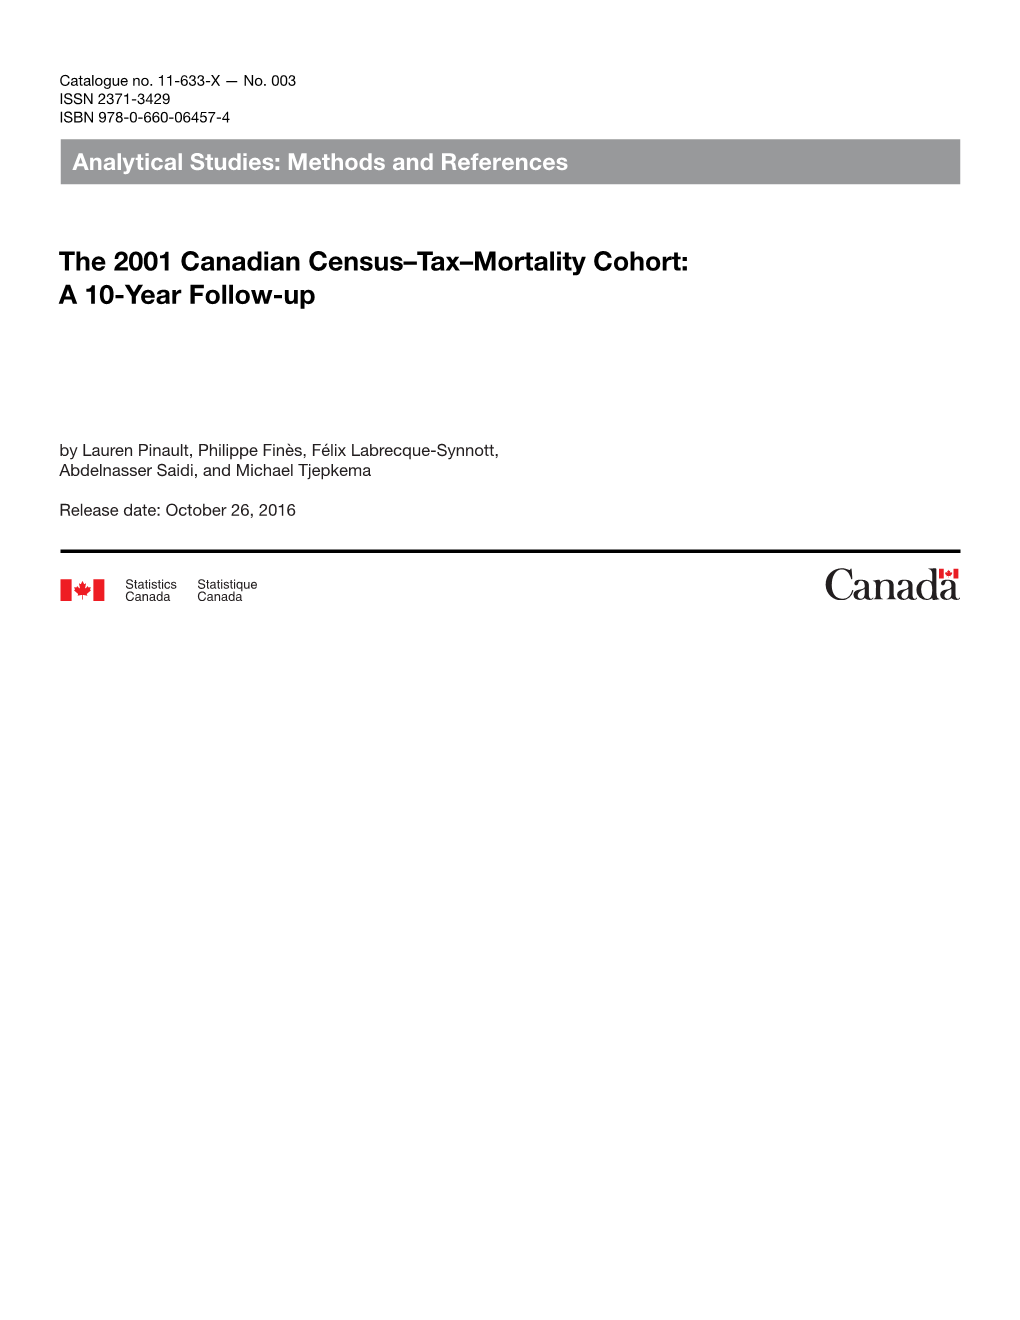 The 2001 Canadian Census–Tax–Mortality Cohort: a 10-Year Follow-Up